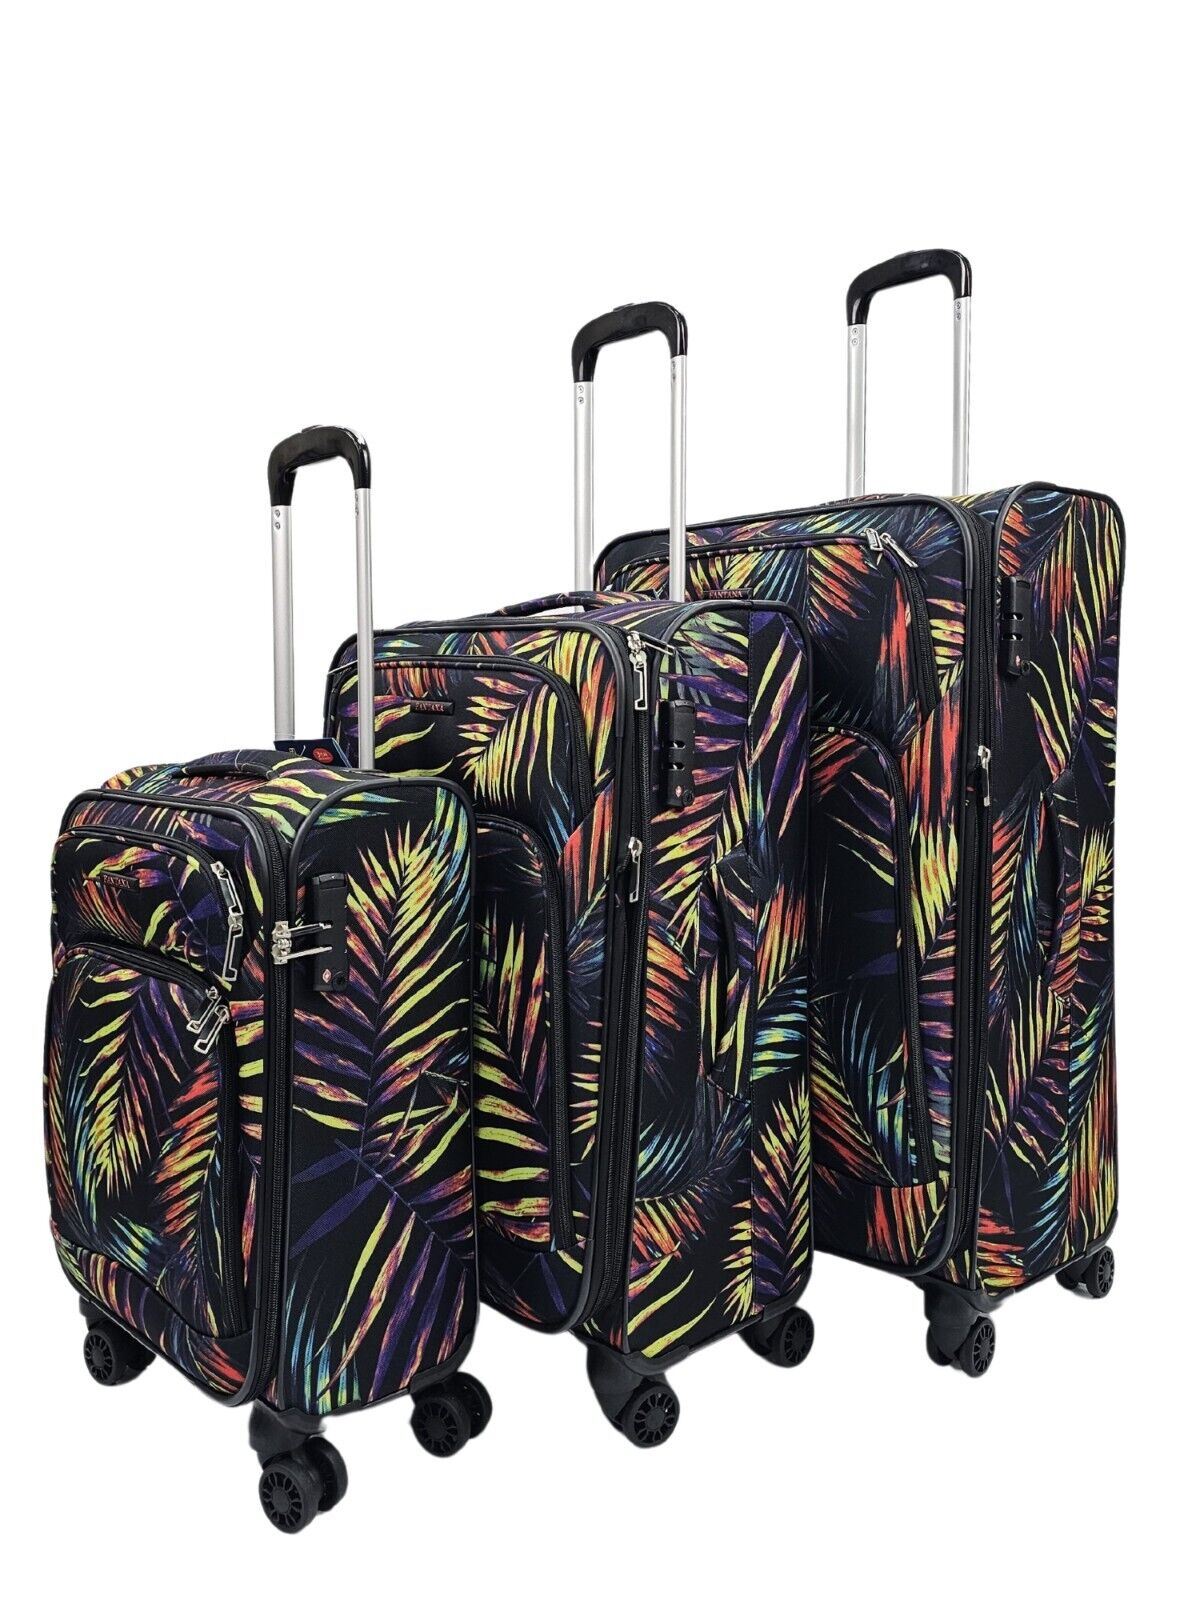 Lightweight Suitcases 8 Wheel Luggage Leaf Travel Soft Bags